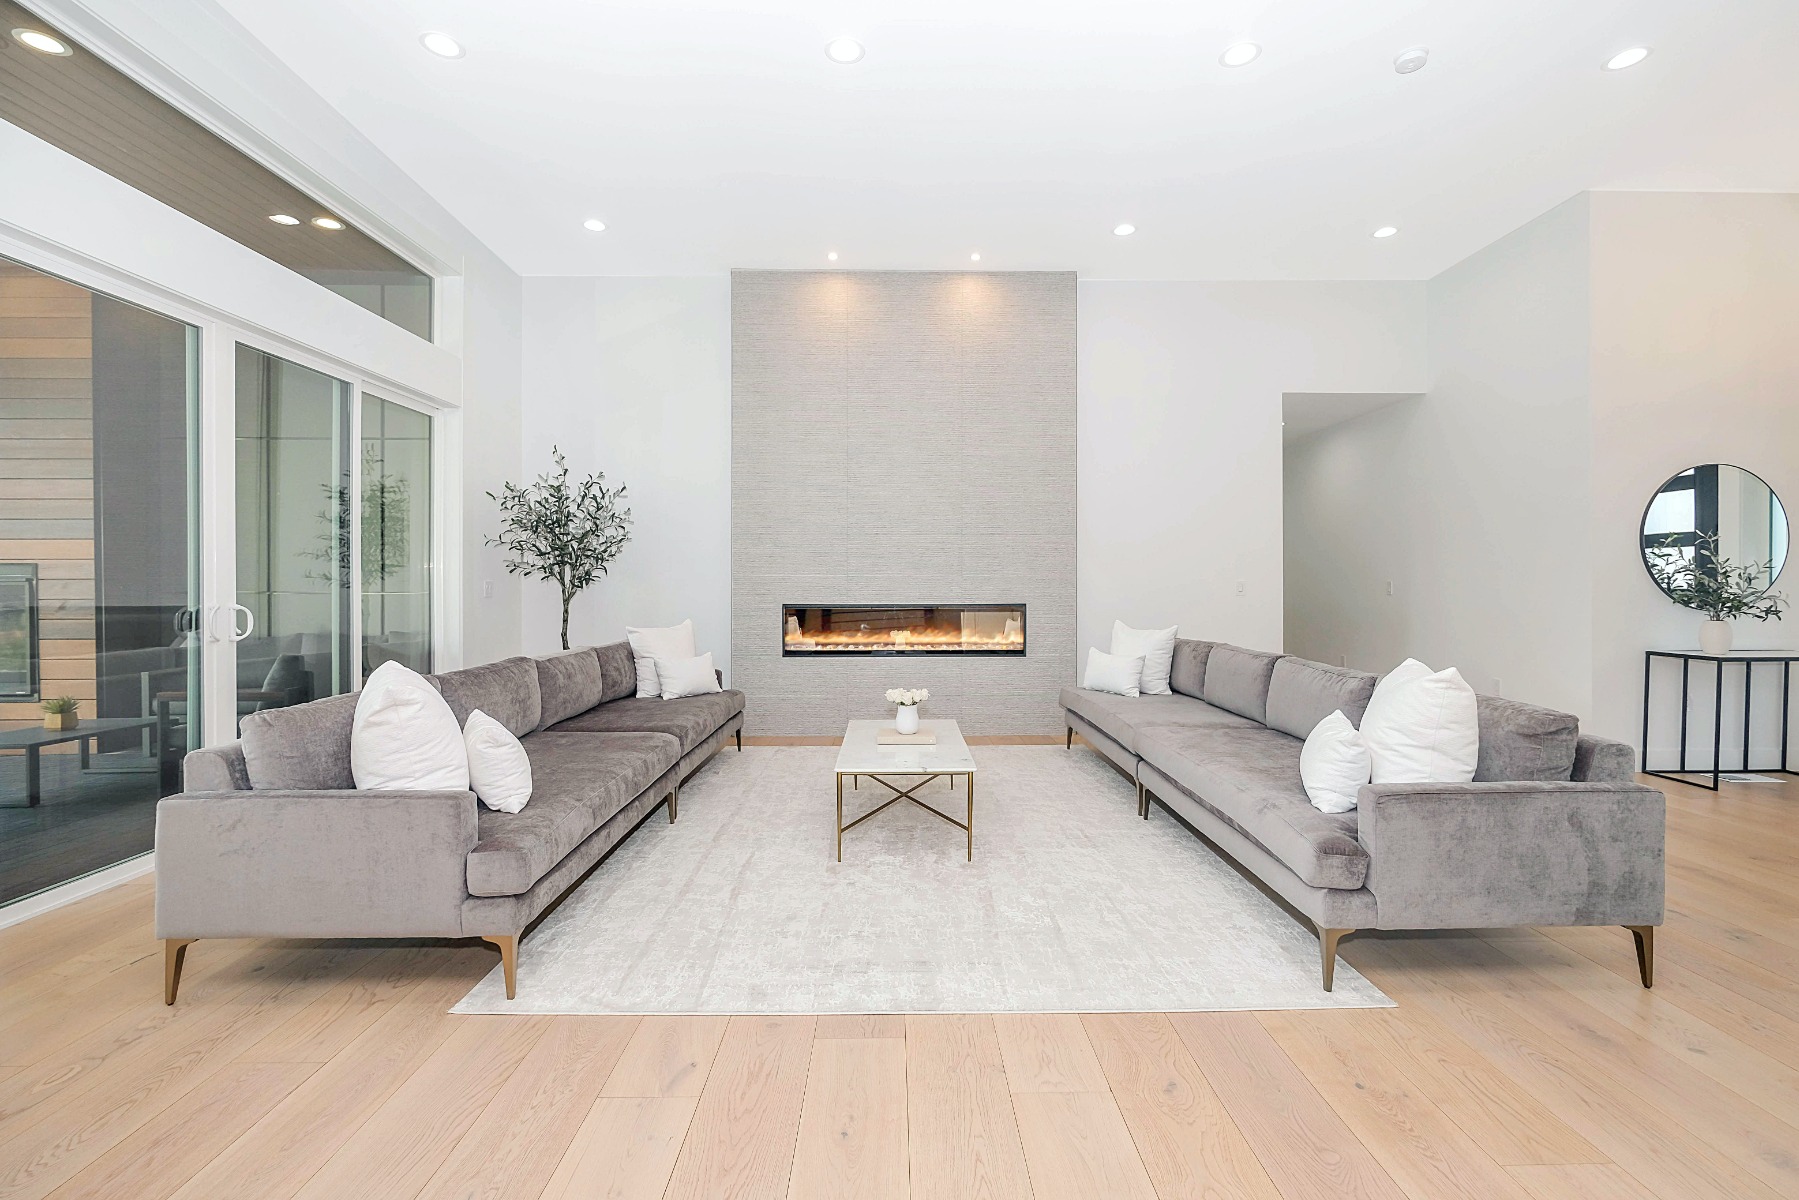 Electric fireplace installed in the centre of a living room with grey sofas on both sides